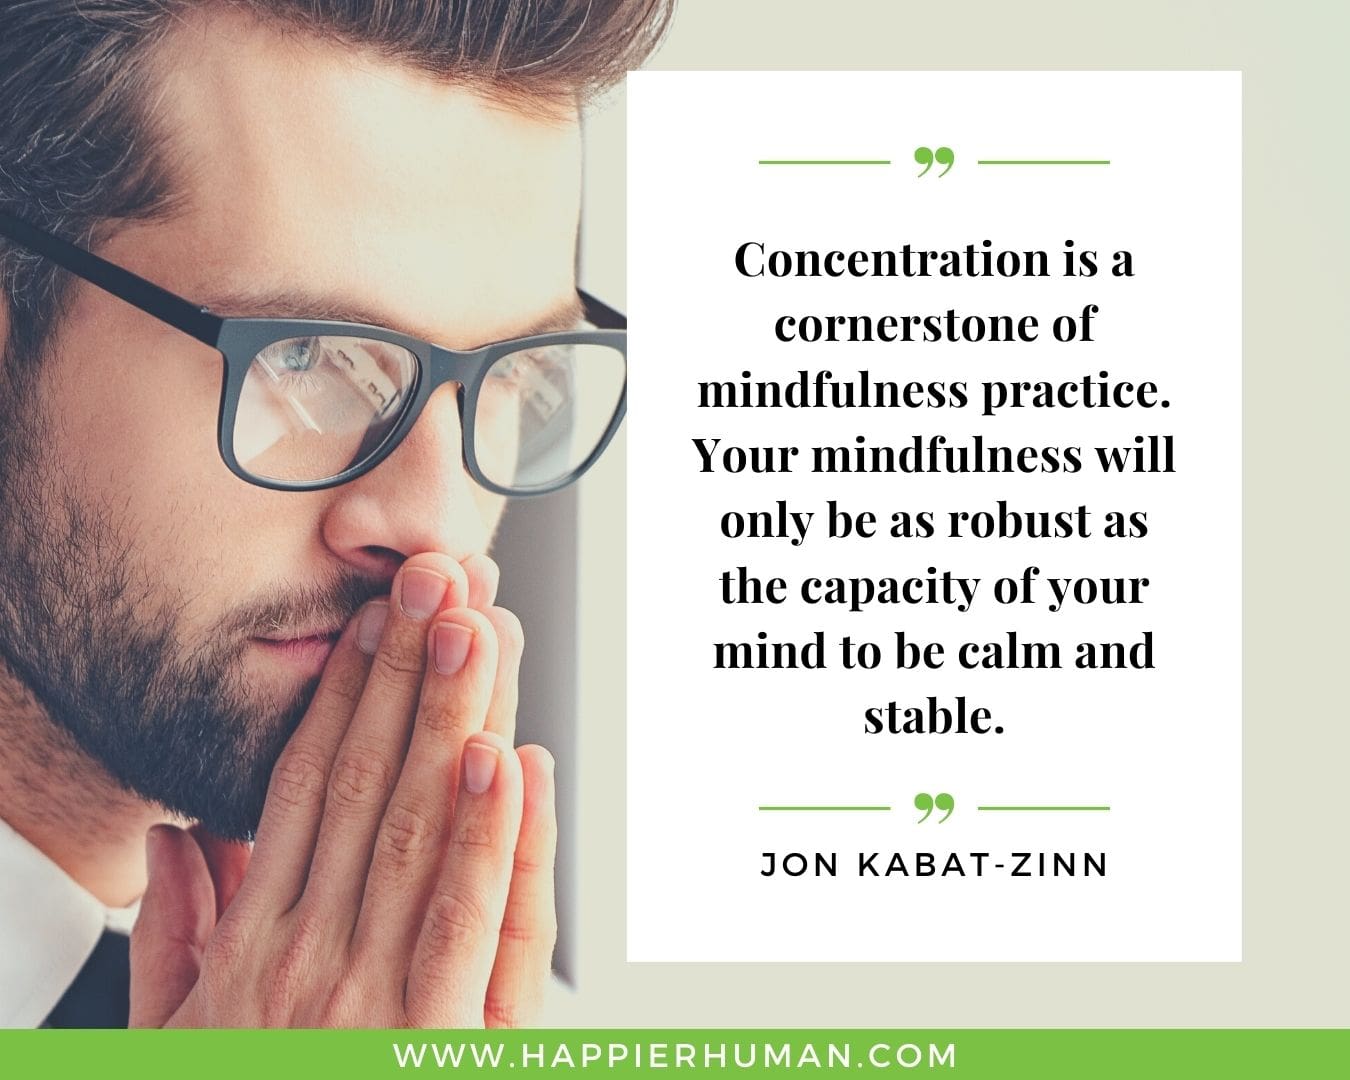 Overthinking Quotes - "Concentration is a cornerstone of mindfulness practice. Your mindfulness will only be as robust as the capacity of your mind to be calm and stable." - Jon Kabat-Zinn